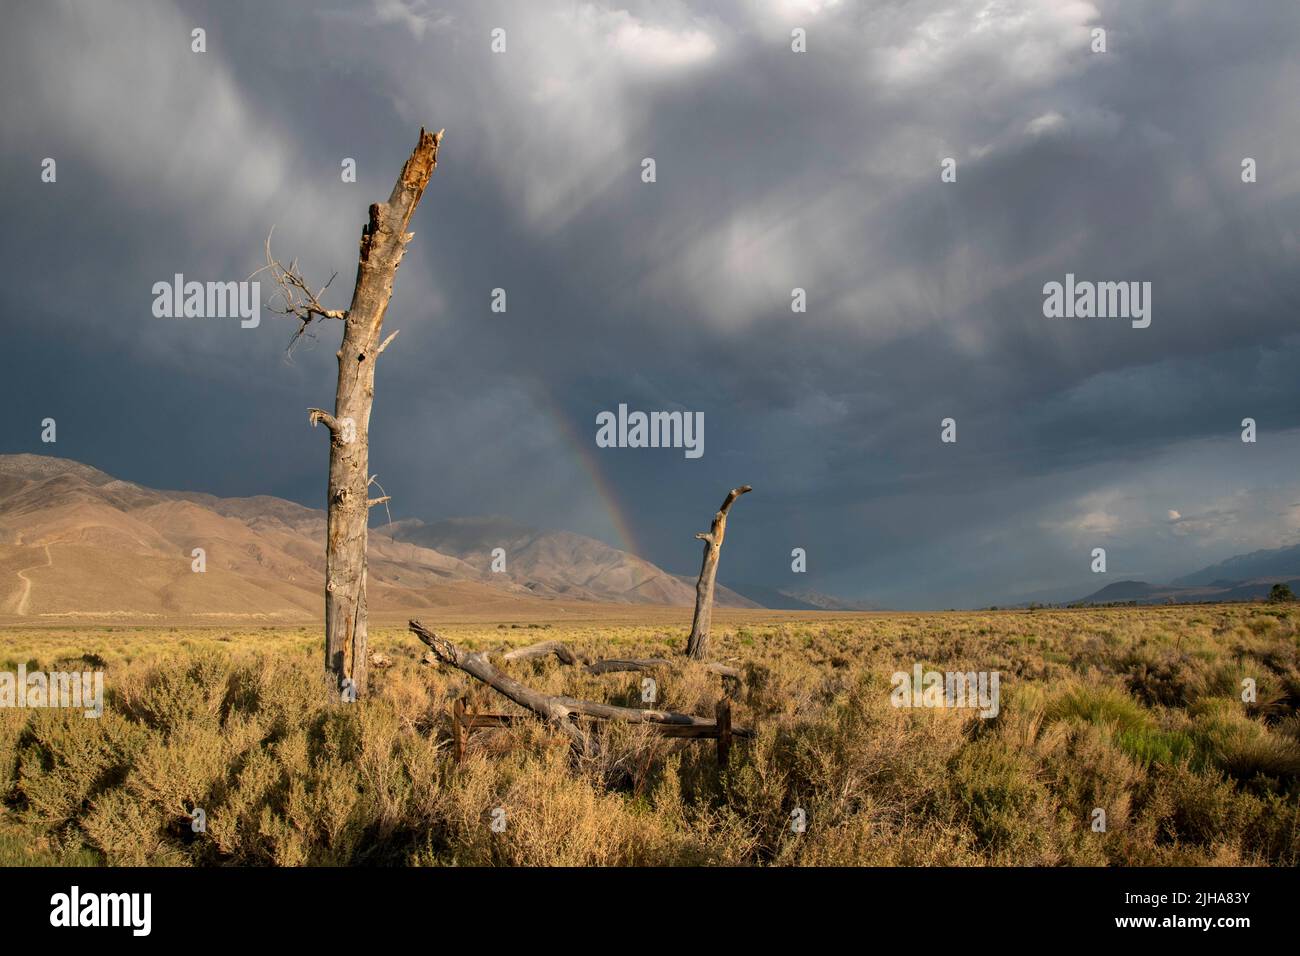 Thunderstorms around Bishop and the Eastern Sierra of California produce thunder, lightning, rainbows and dramatic skies. Stock Photo